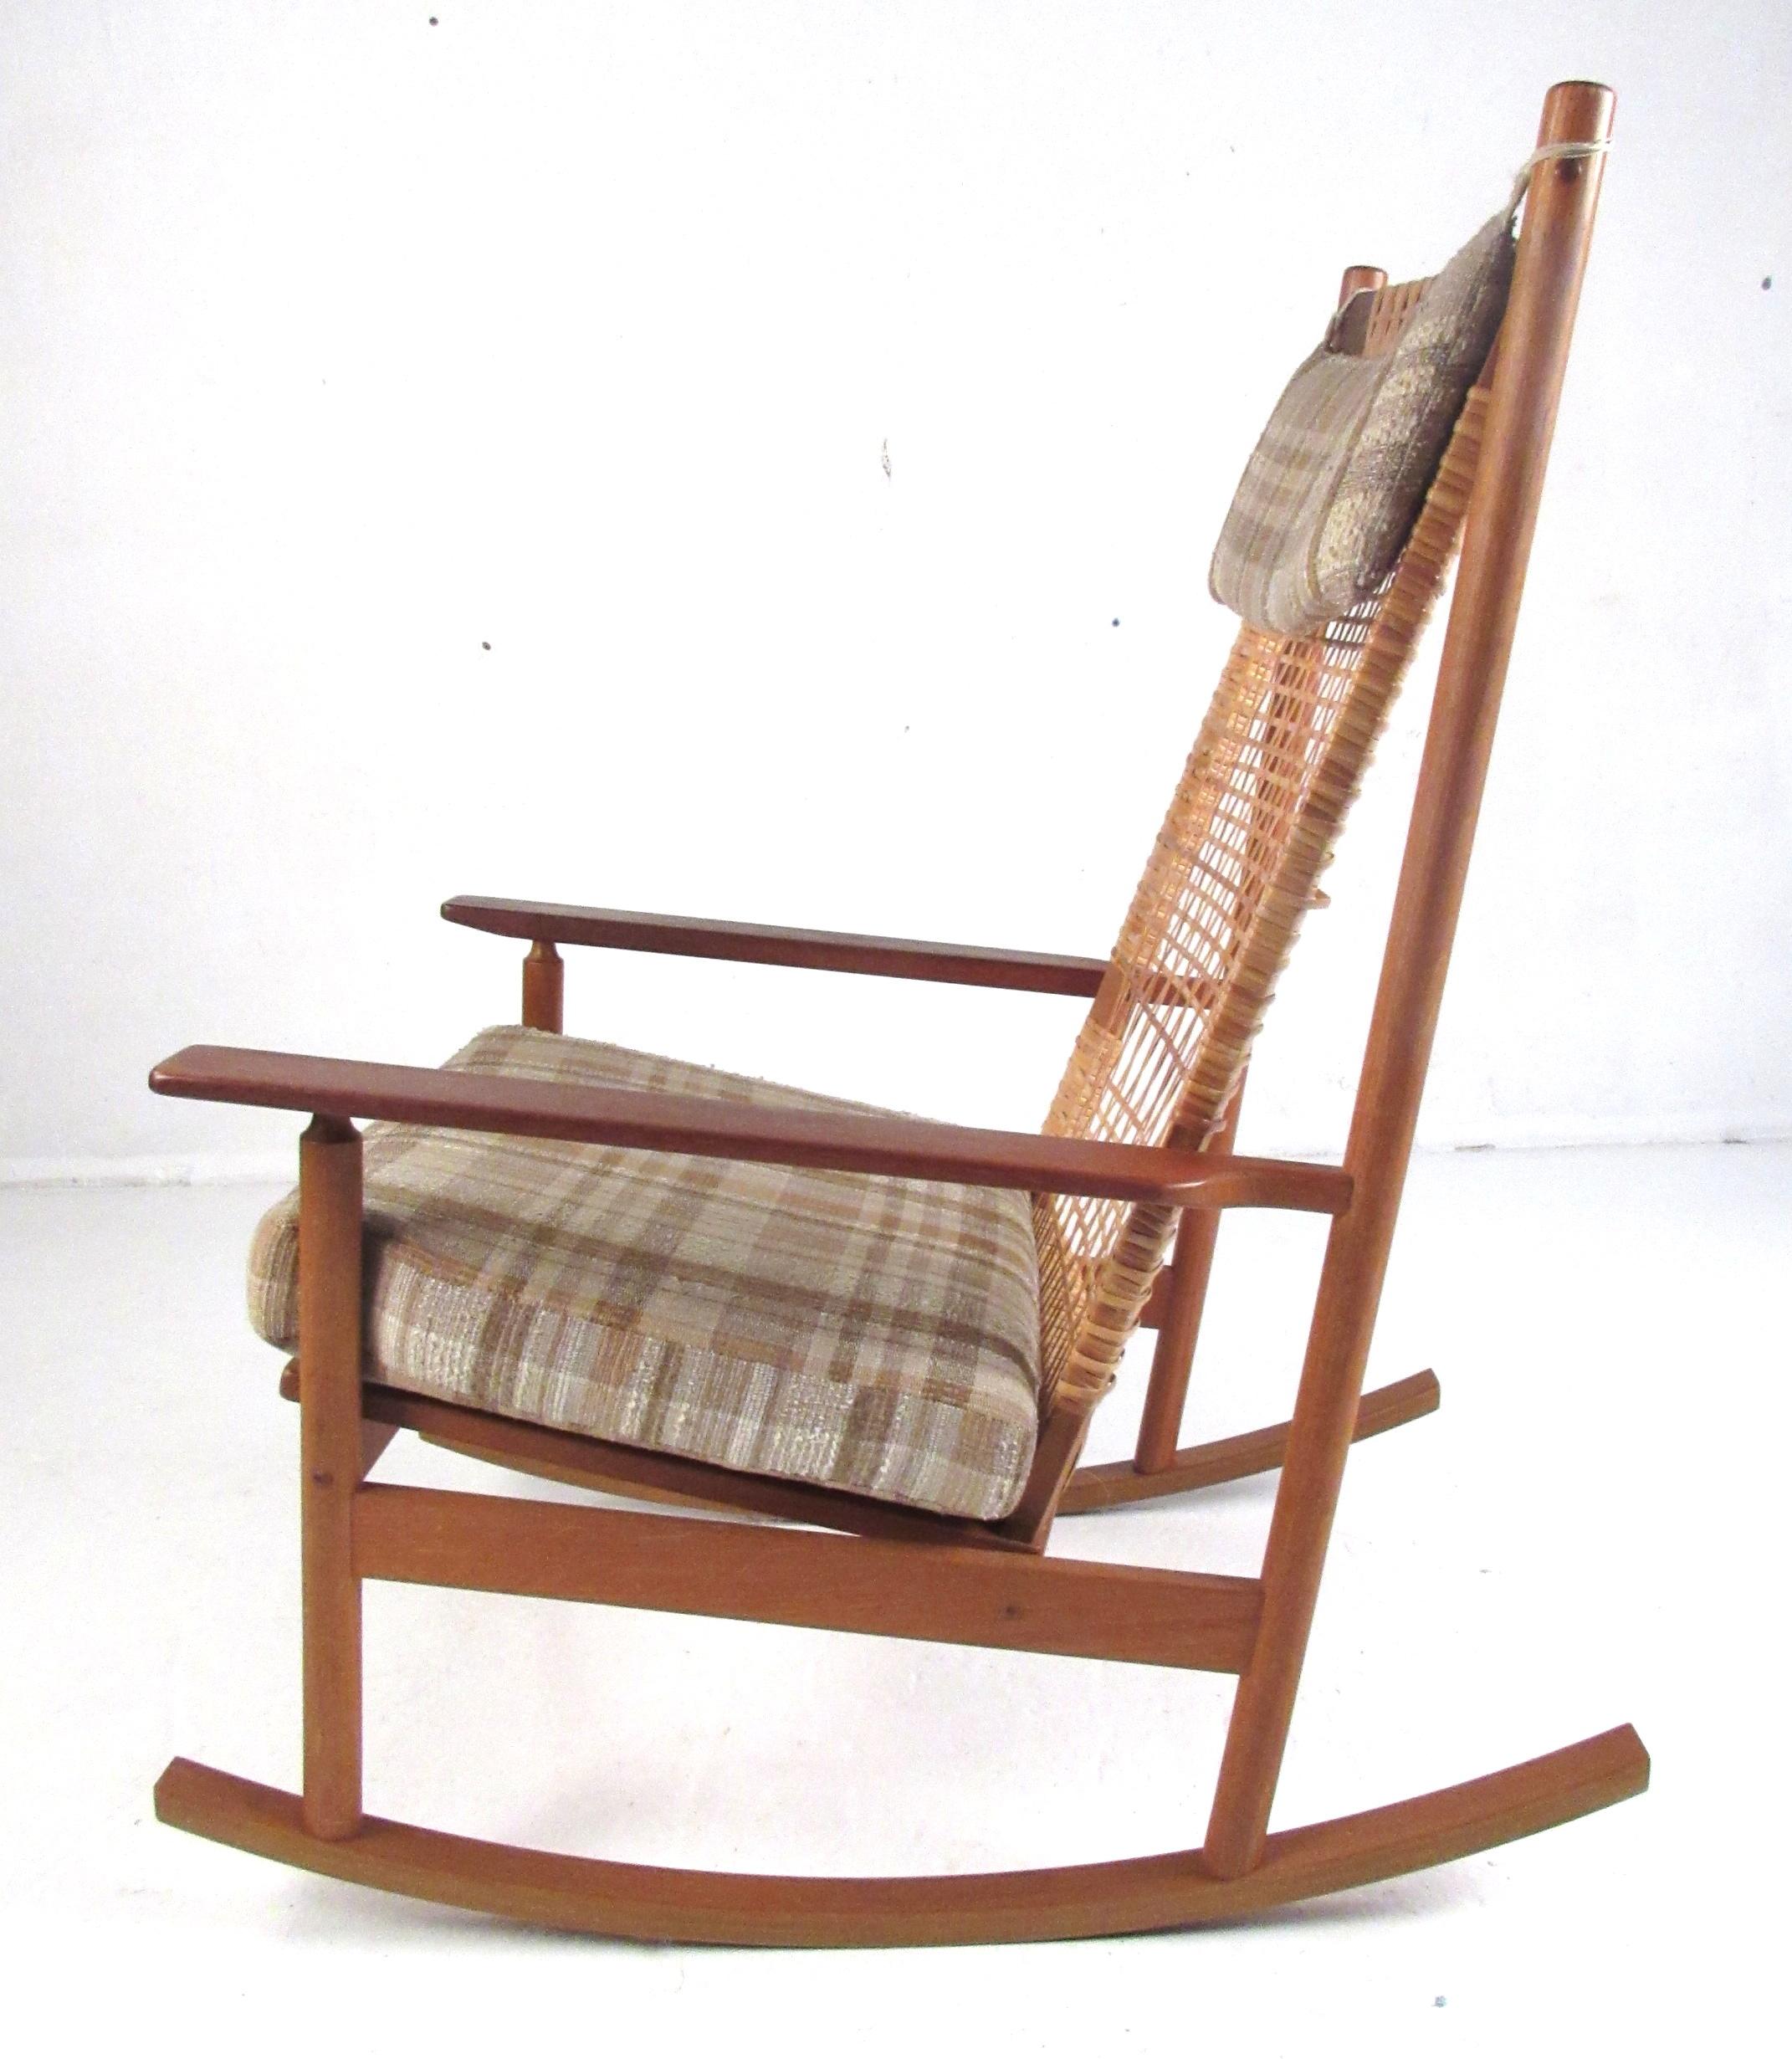 This beautiful Danish modern teak rocking chair was designed by Hans Olsen and produced by Juul Kristensen, circa 1963. It features a wonderful woven cane back complimented by thin edge tapered armrests with an upholstered seat and headrest. Stamped